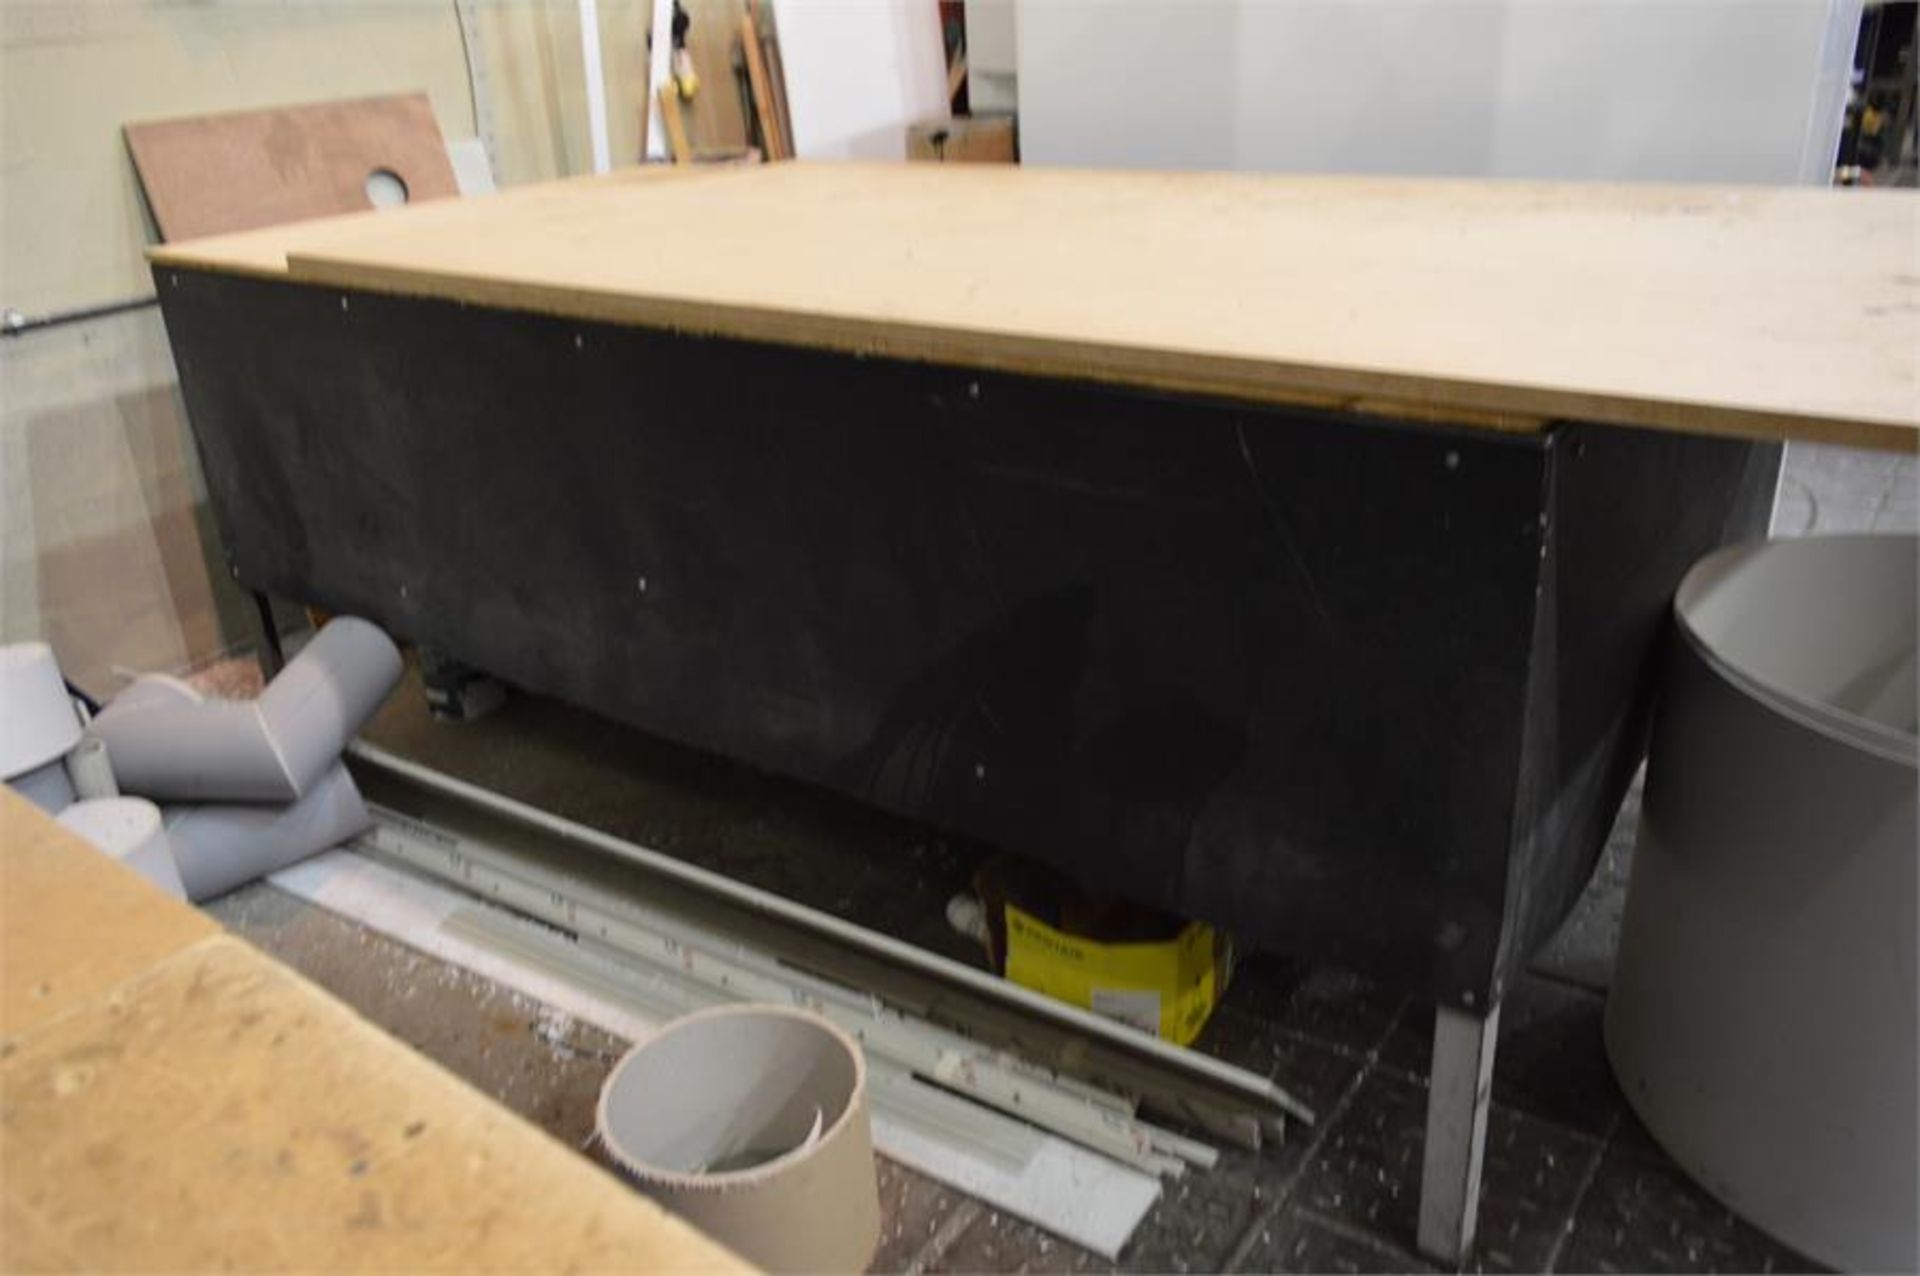 Steel framed wooden topped fabricated workbench, 2.92m x 1.22m x 1.02m (H), (contents not included)